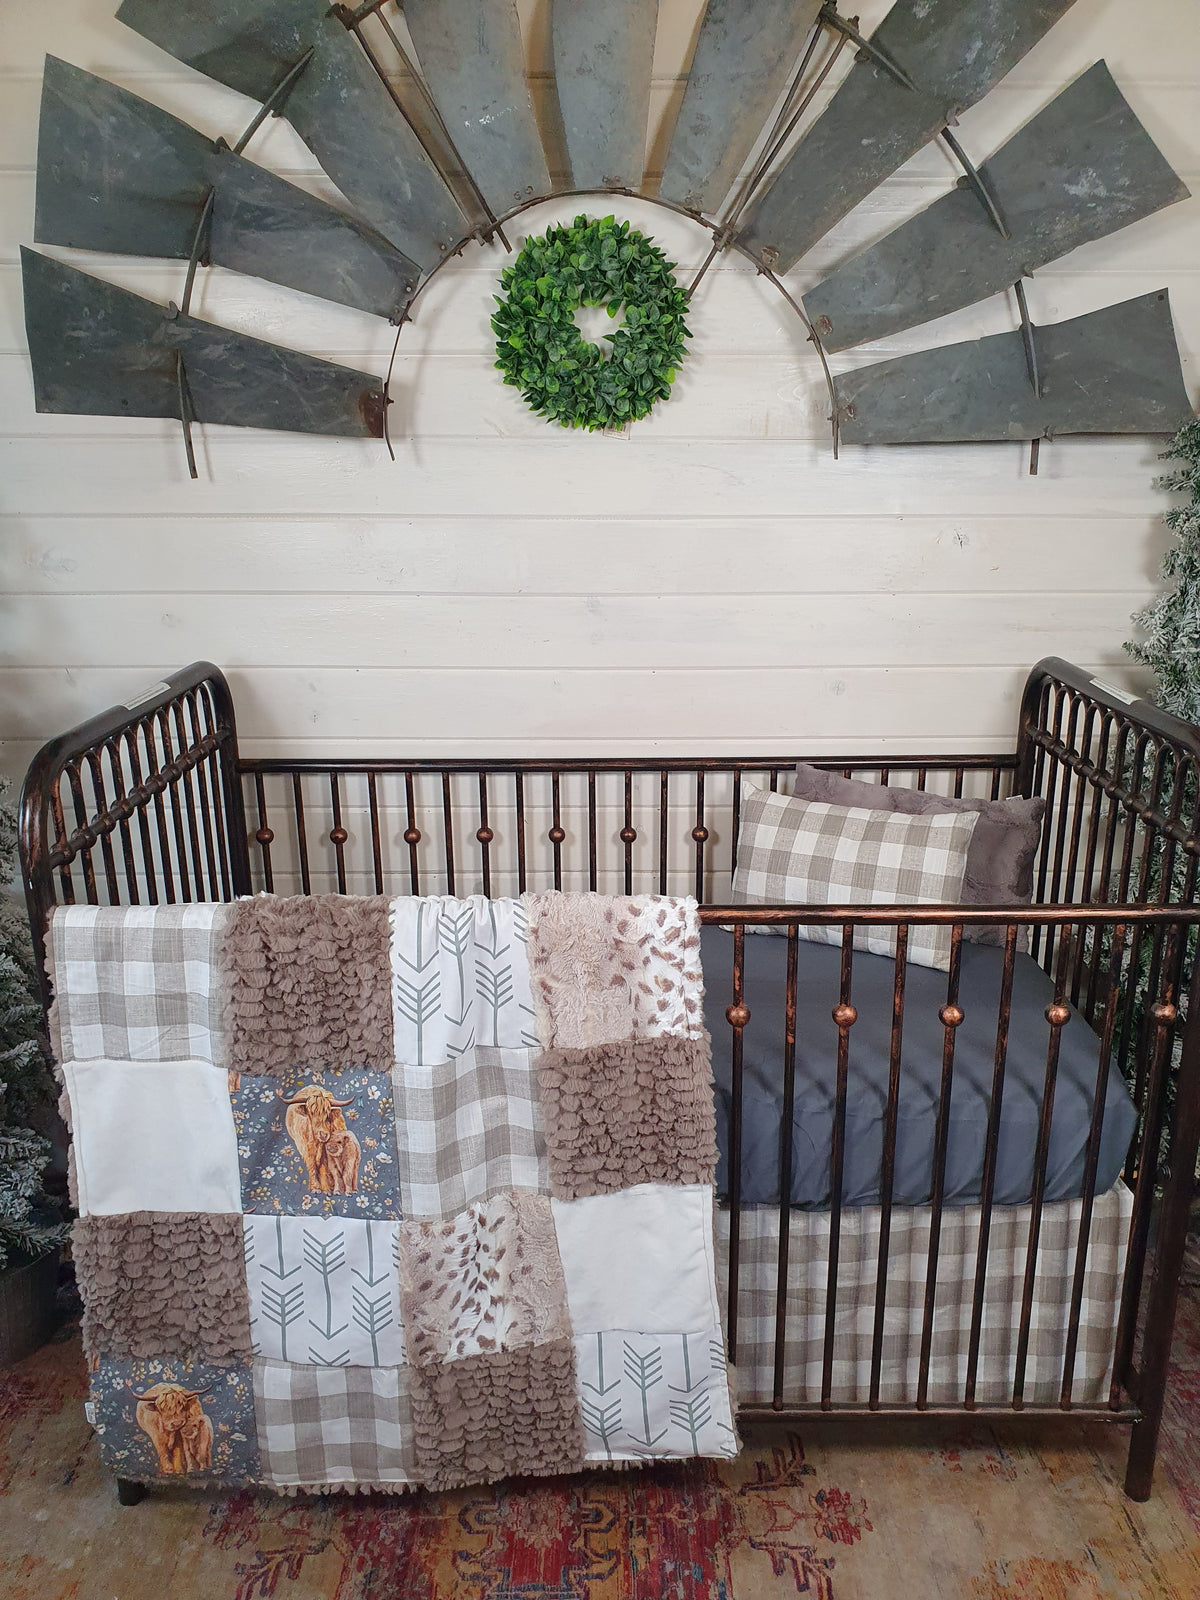 New Release Girl Crib Bedding- Field Flower Highland Cows Baby Bedding Collection - DBC Baby Bedding Co 